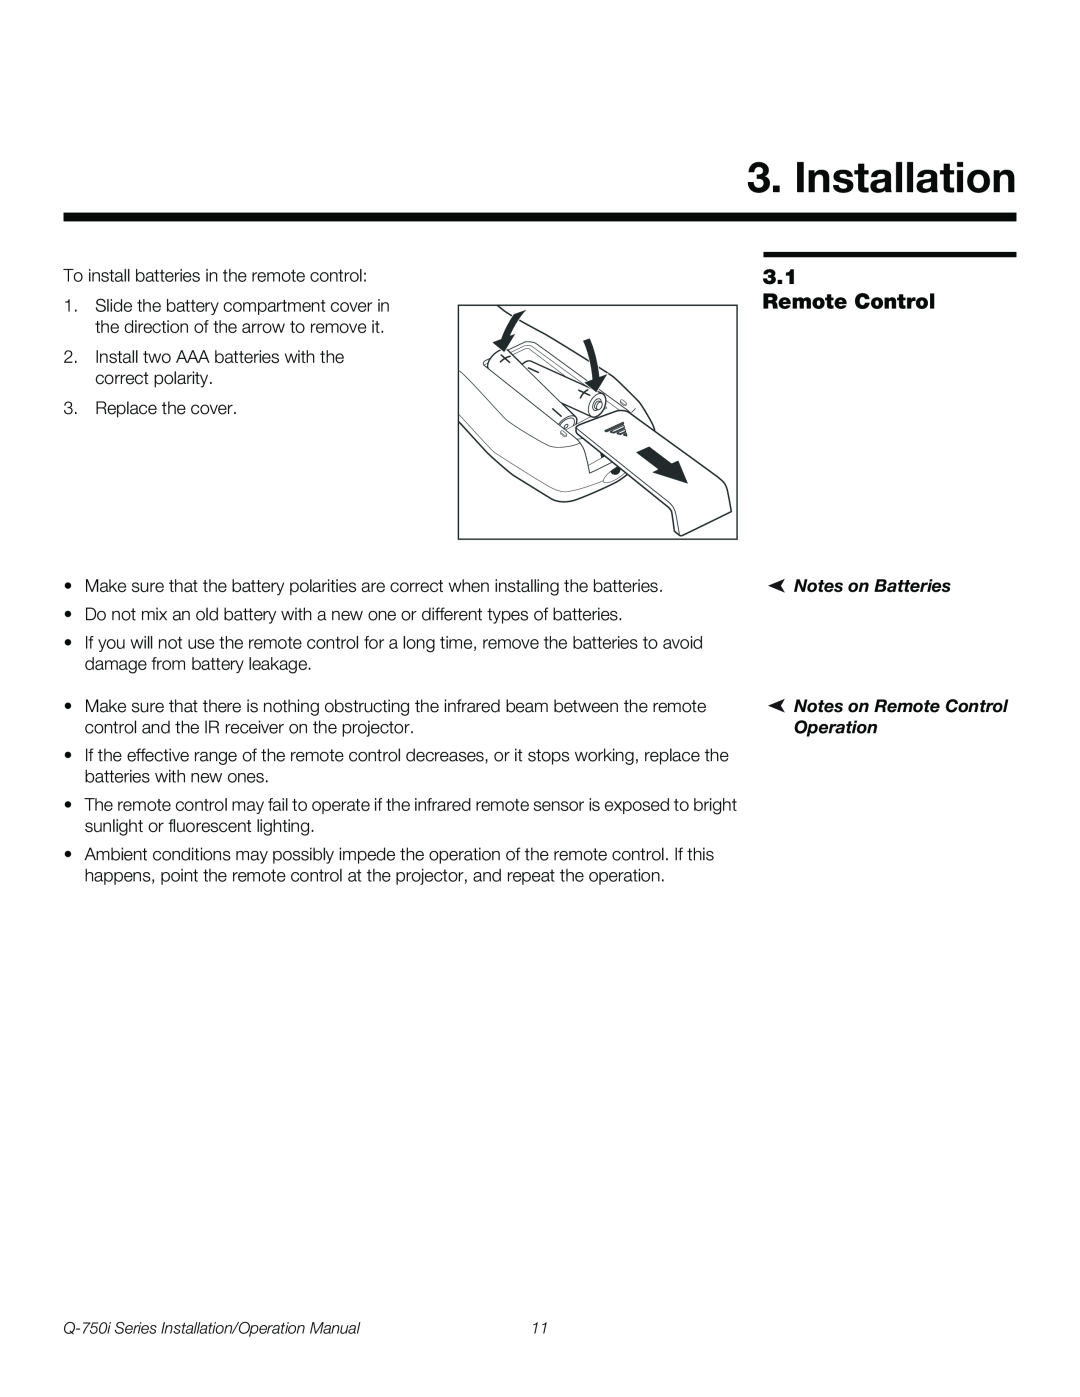 Runco Q-750I operation manual Installation, Notes on Batteries, Notes on Remote Control Operation 